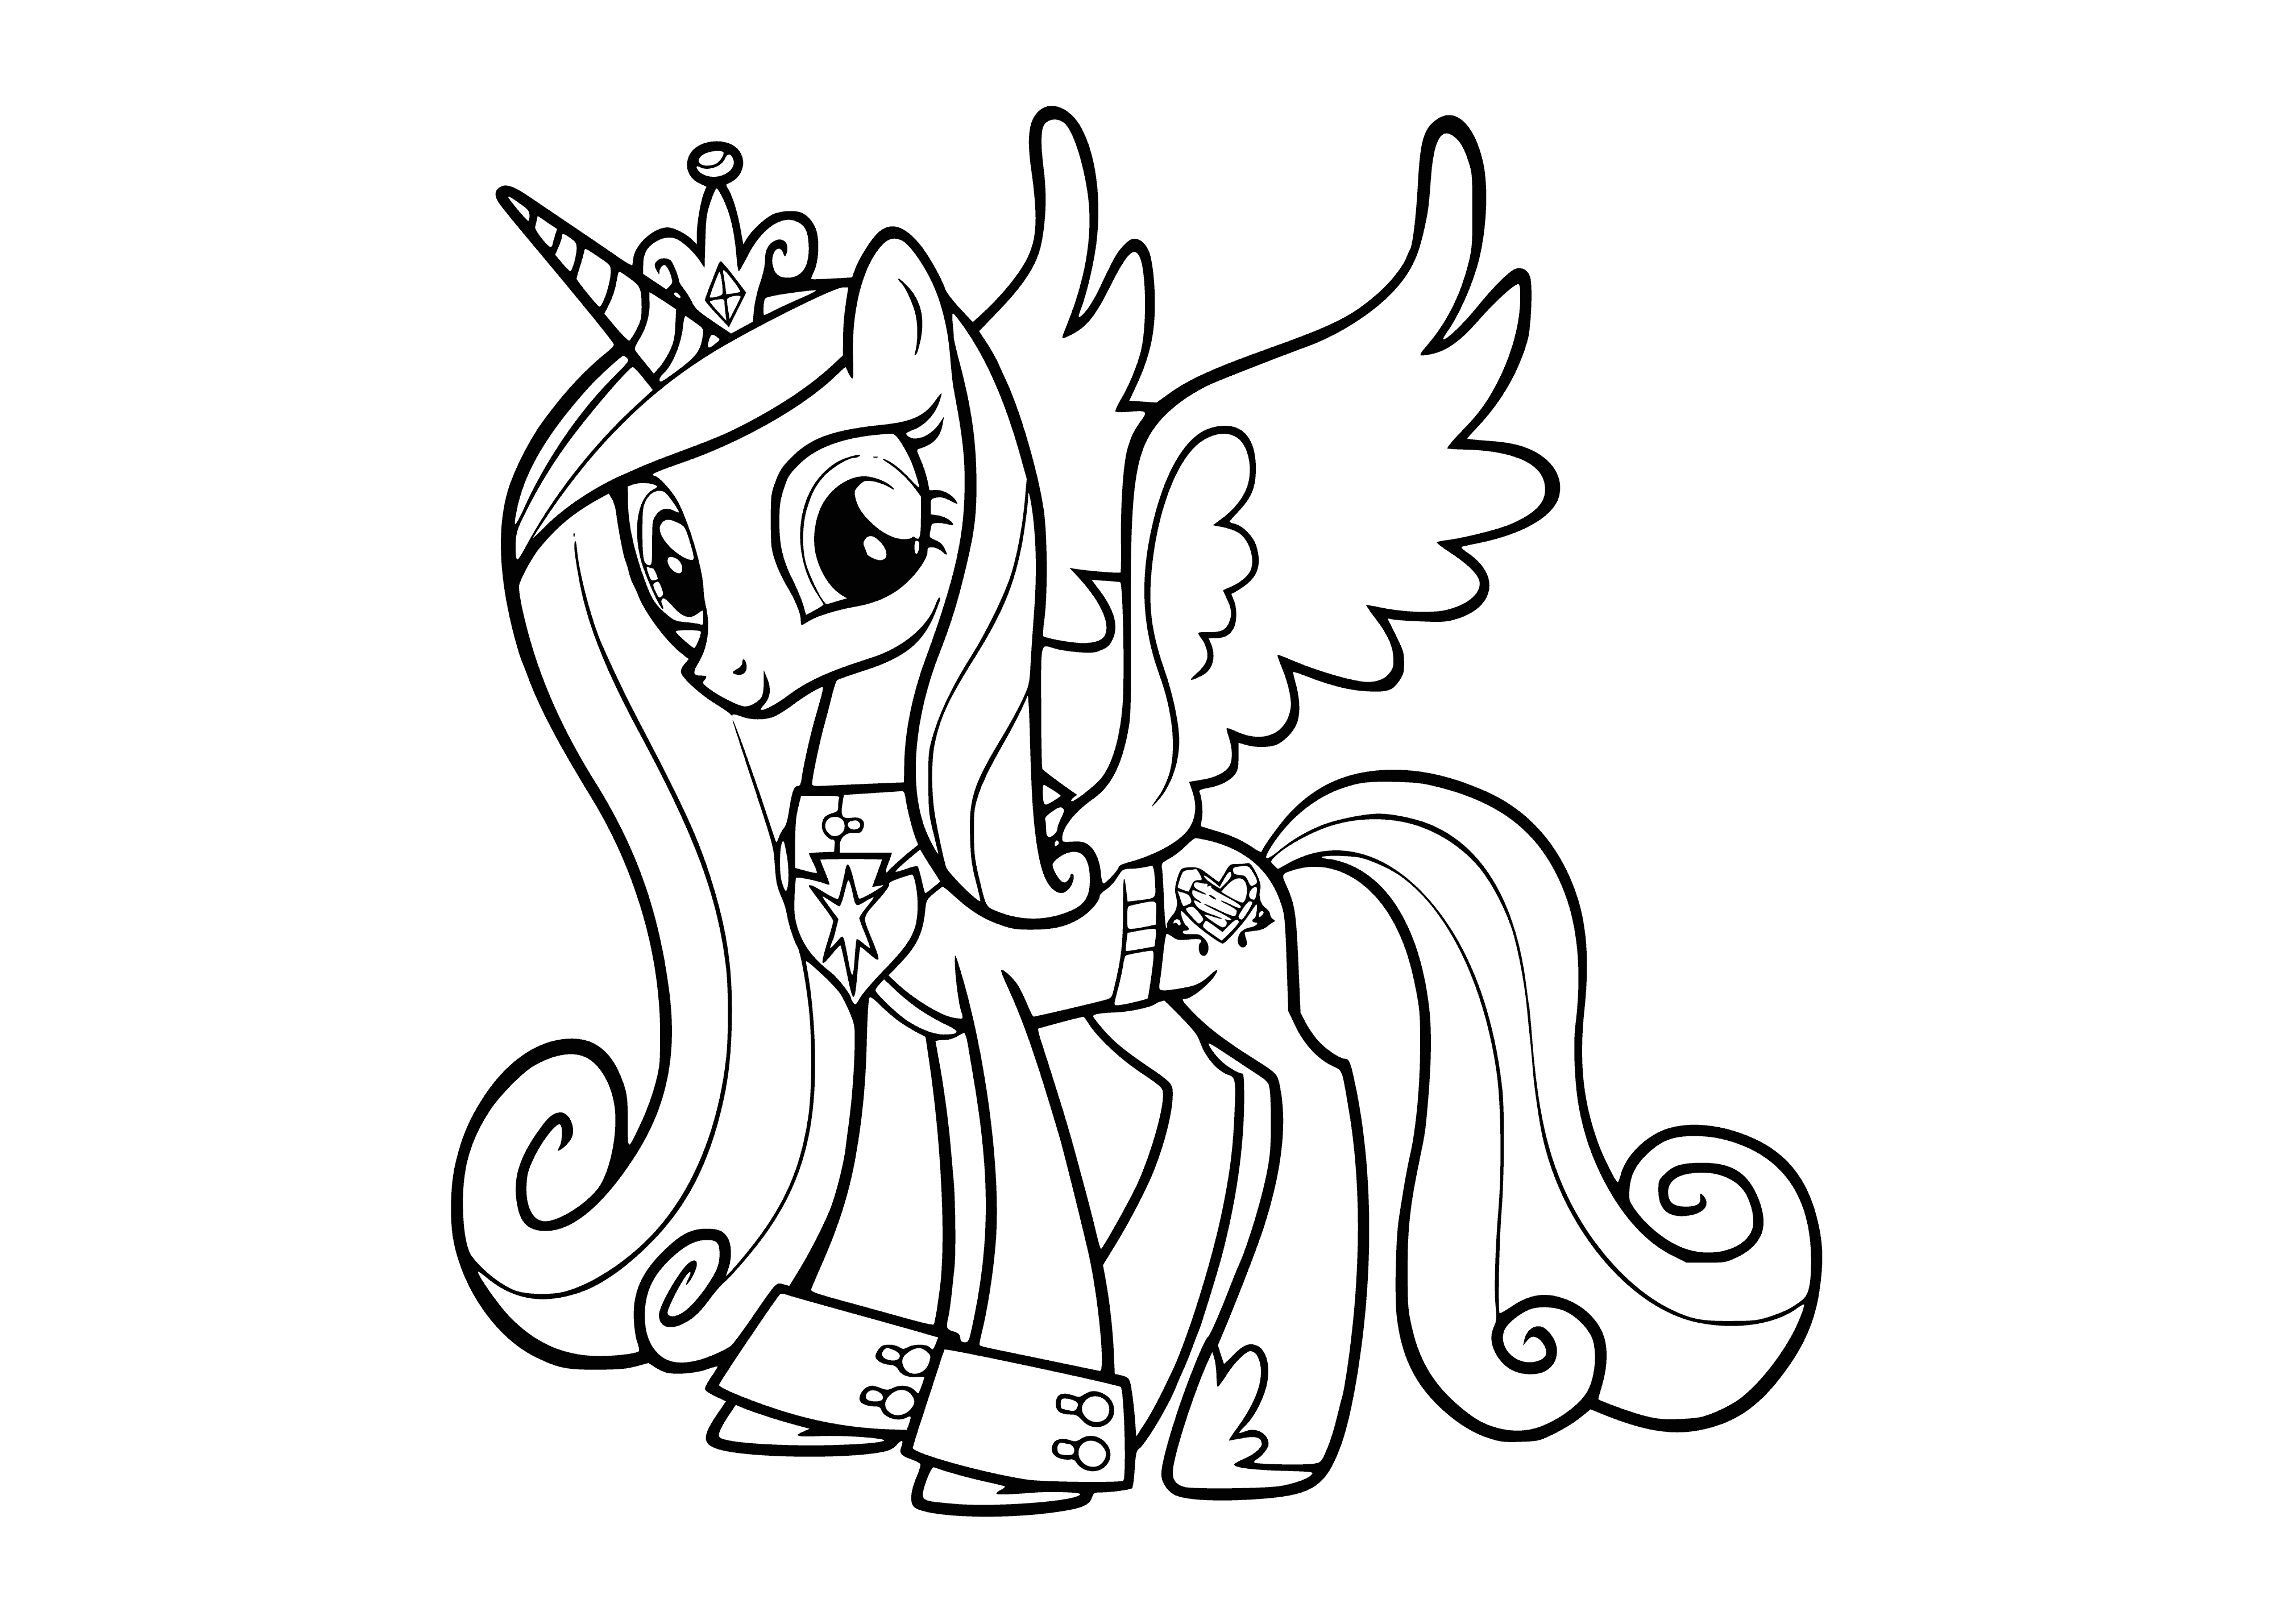 coloring page: A beautiful young woman with pink hair and dress stands in sunlight, looking content and happy. Tiara completes her look. #coloring